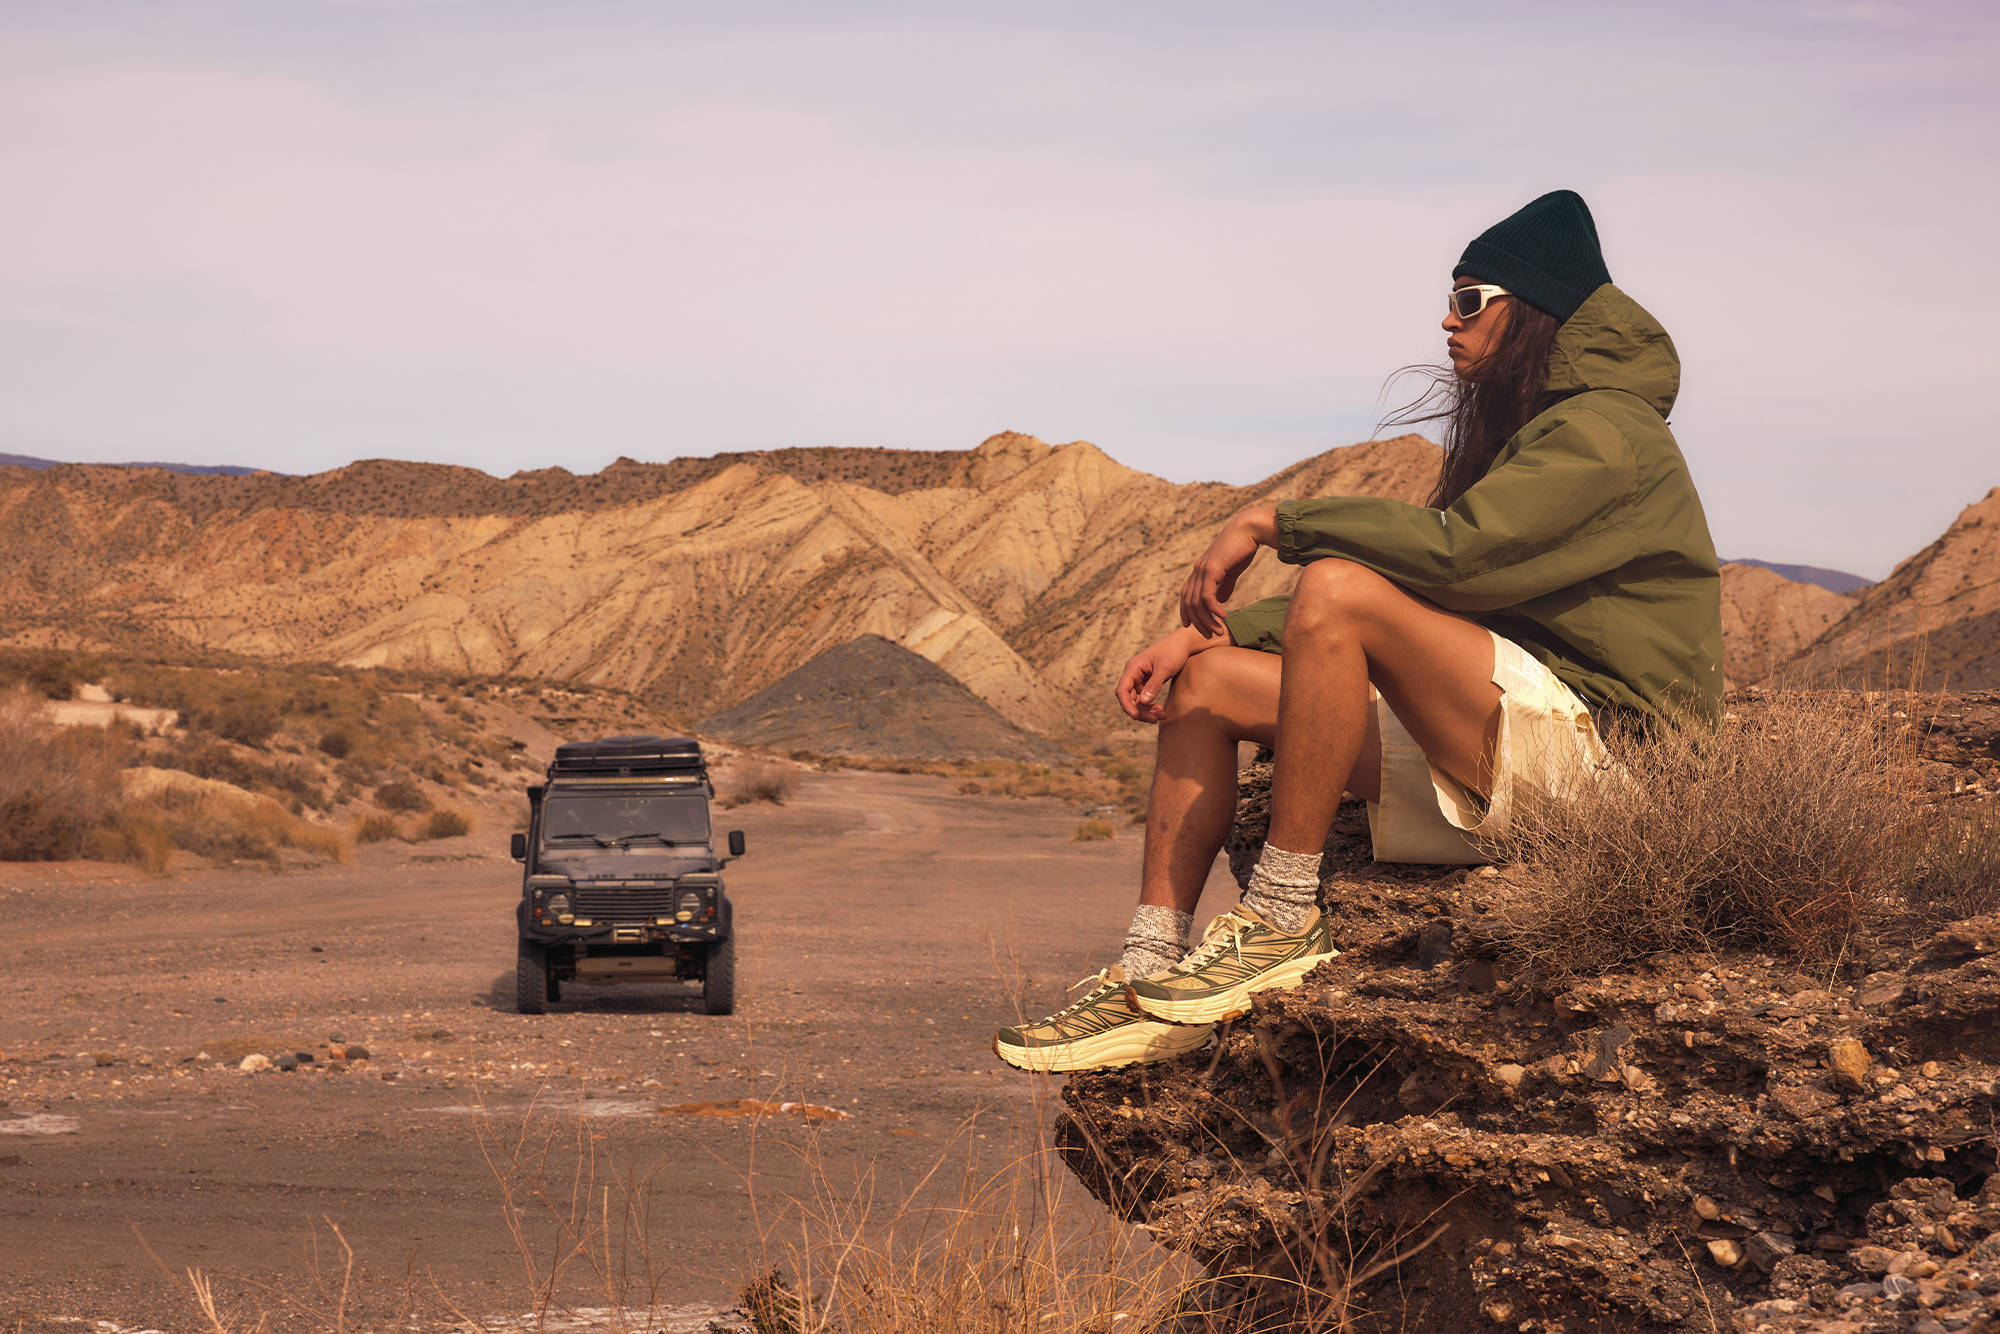 Off The Beaten Track: END x HOKA Team Up For The Overland Collection |  The Sole Supplier